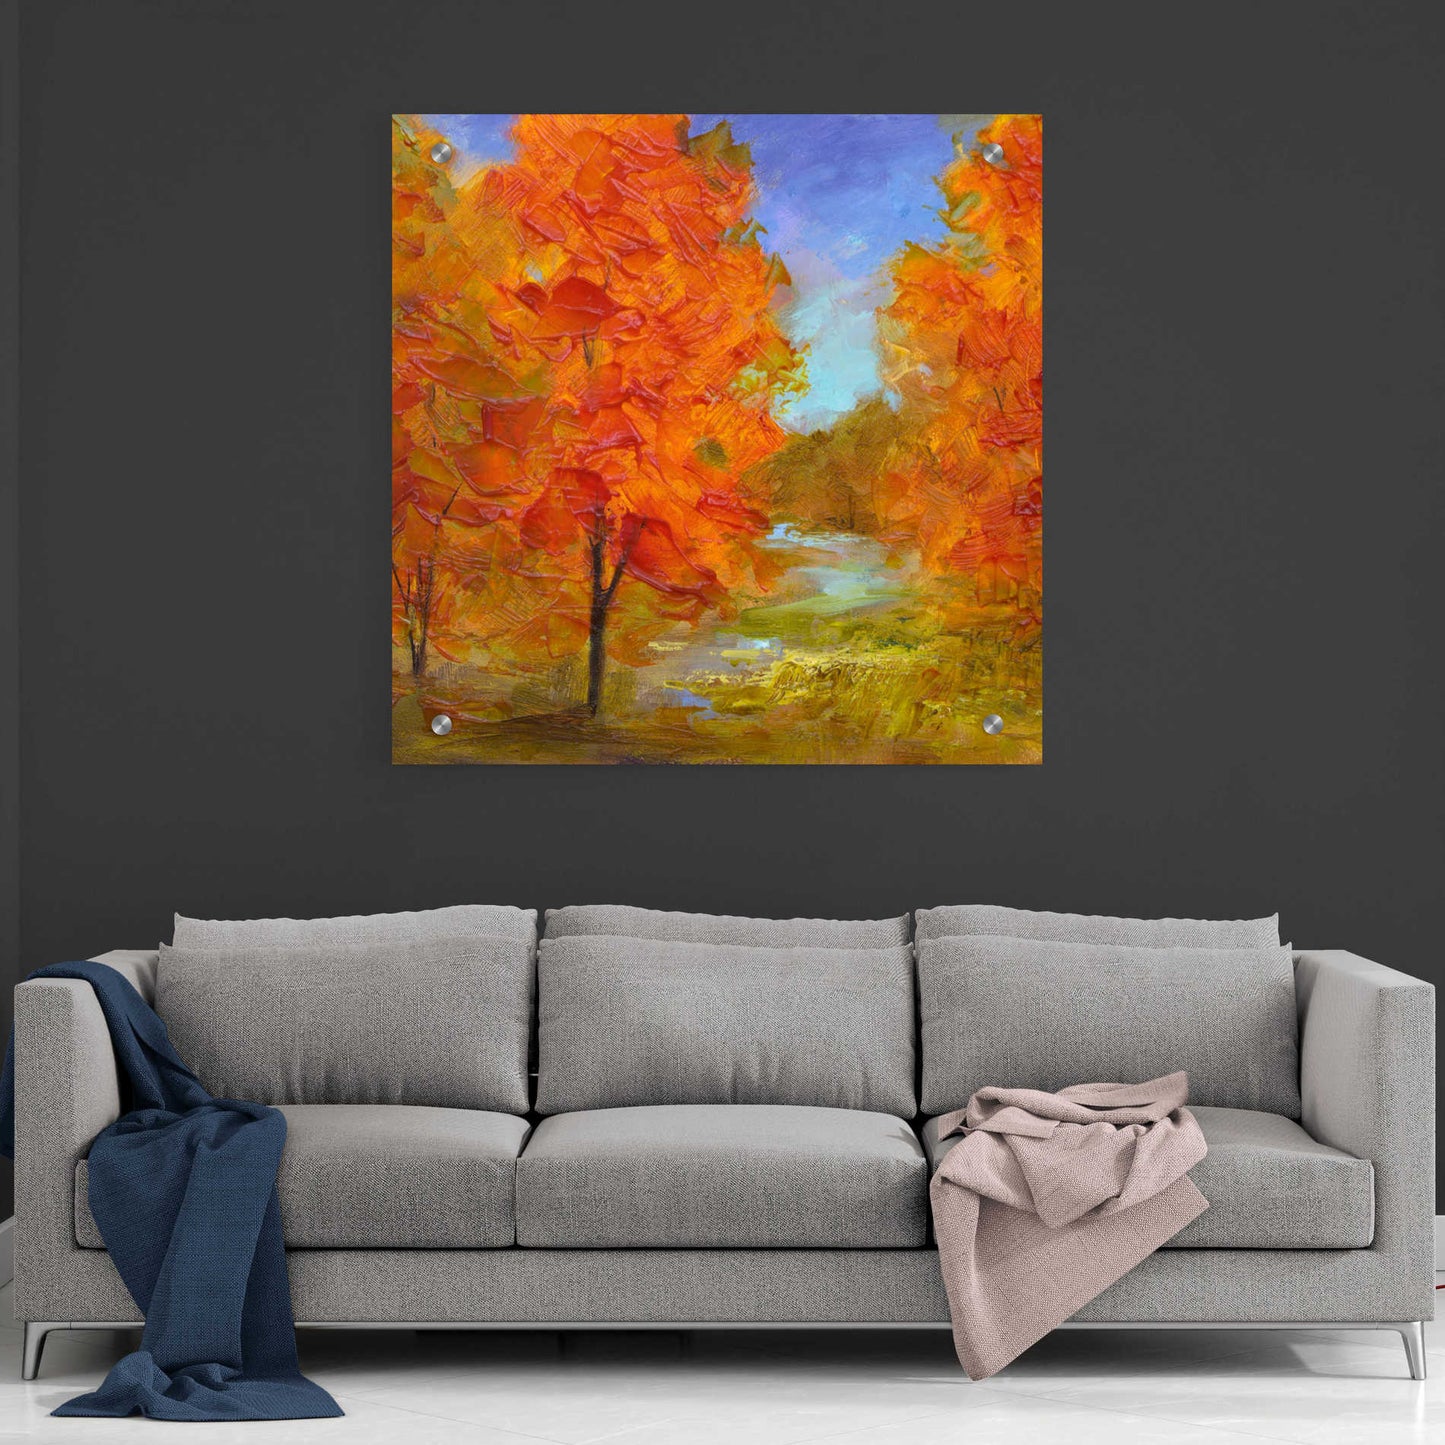 Epic Art 'Burst of Autumn Color' by Sheila Finch, Acrylic Glass Wall Art,36x36